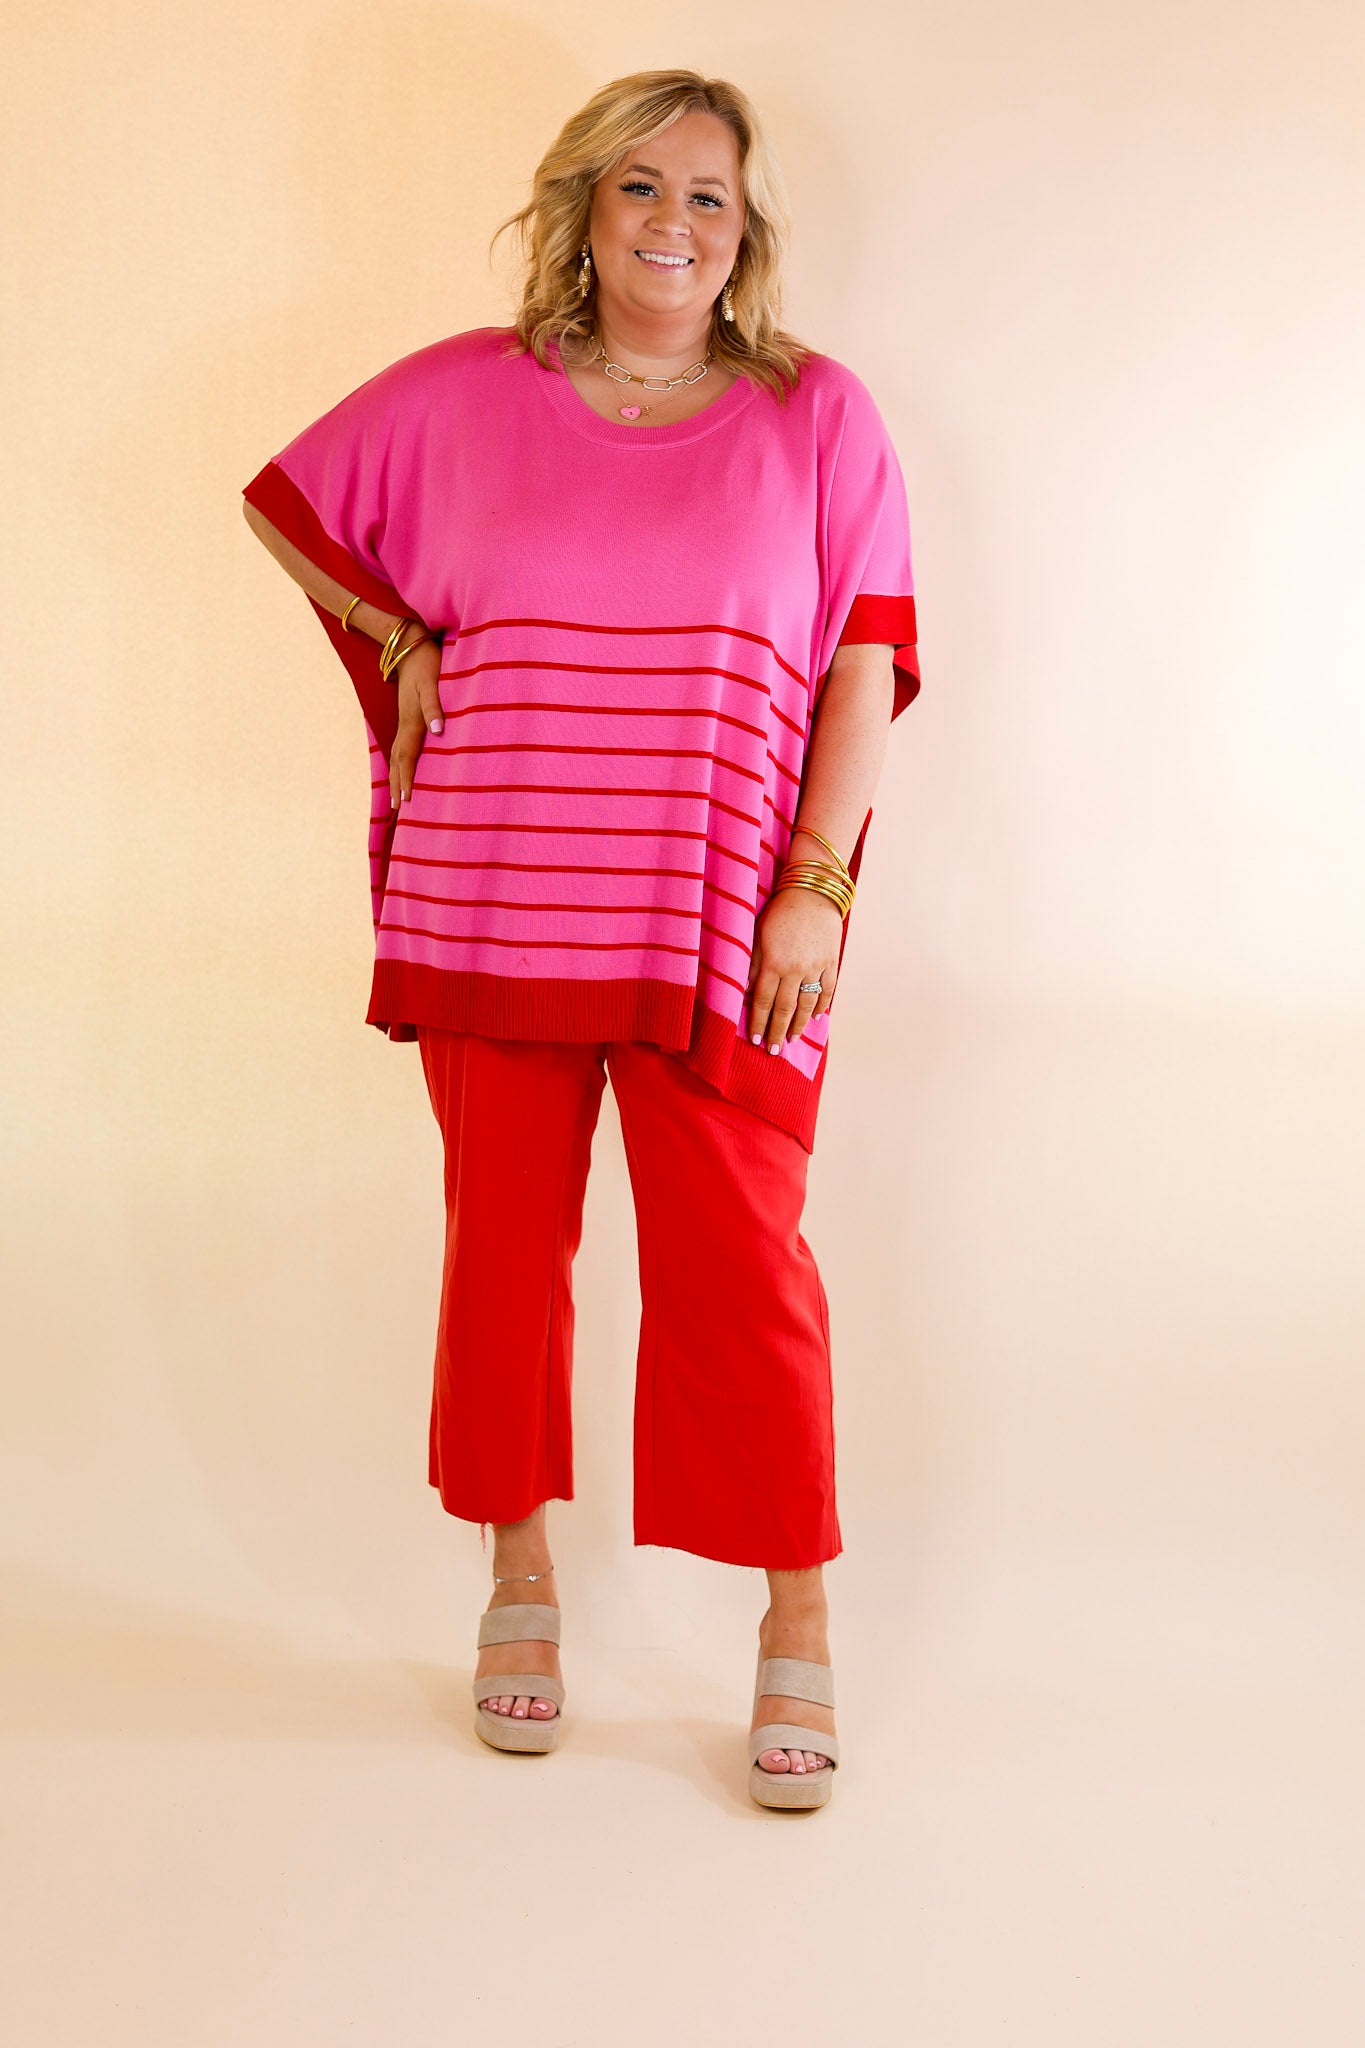 Casual to Chic Short Sleeve Striped Poncho Top in Pink and Red